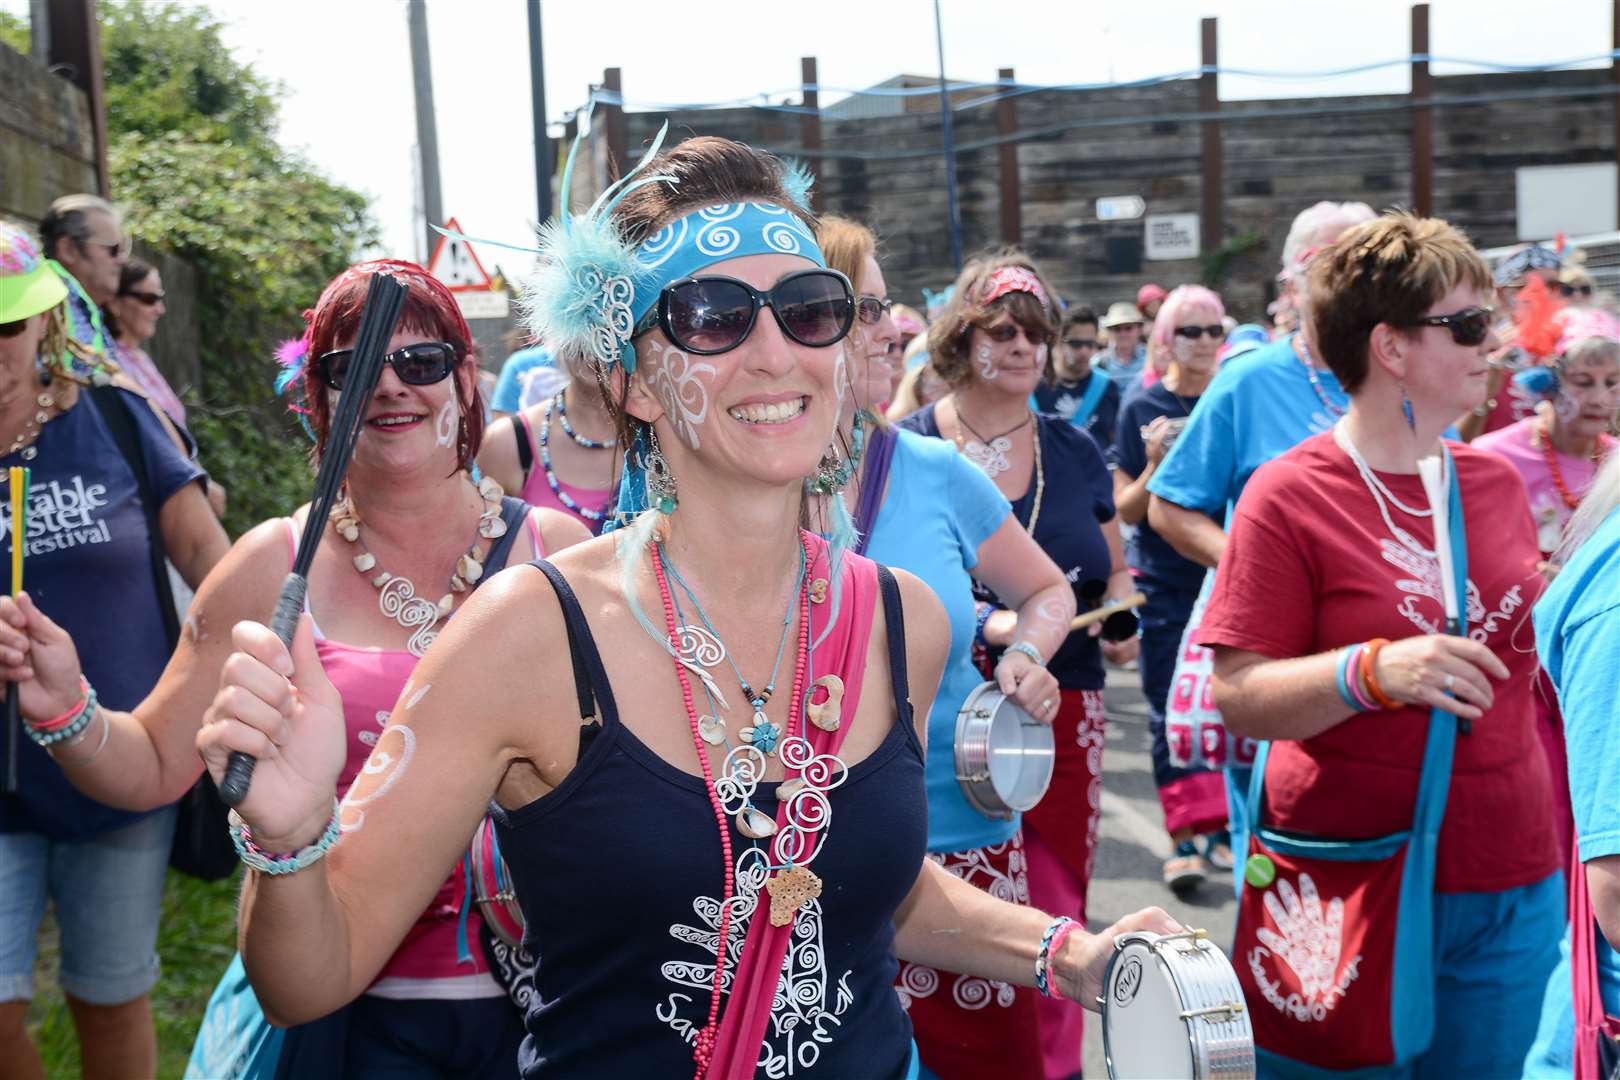 The Oyster Parade in 2014